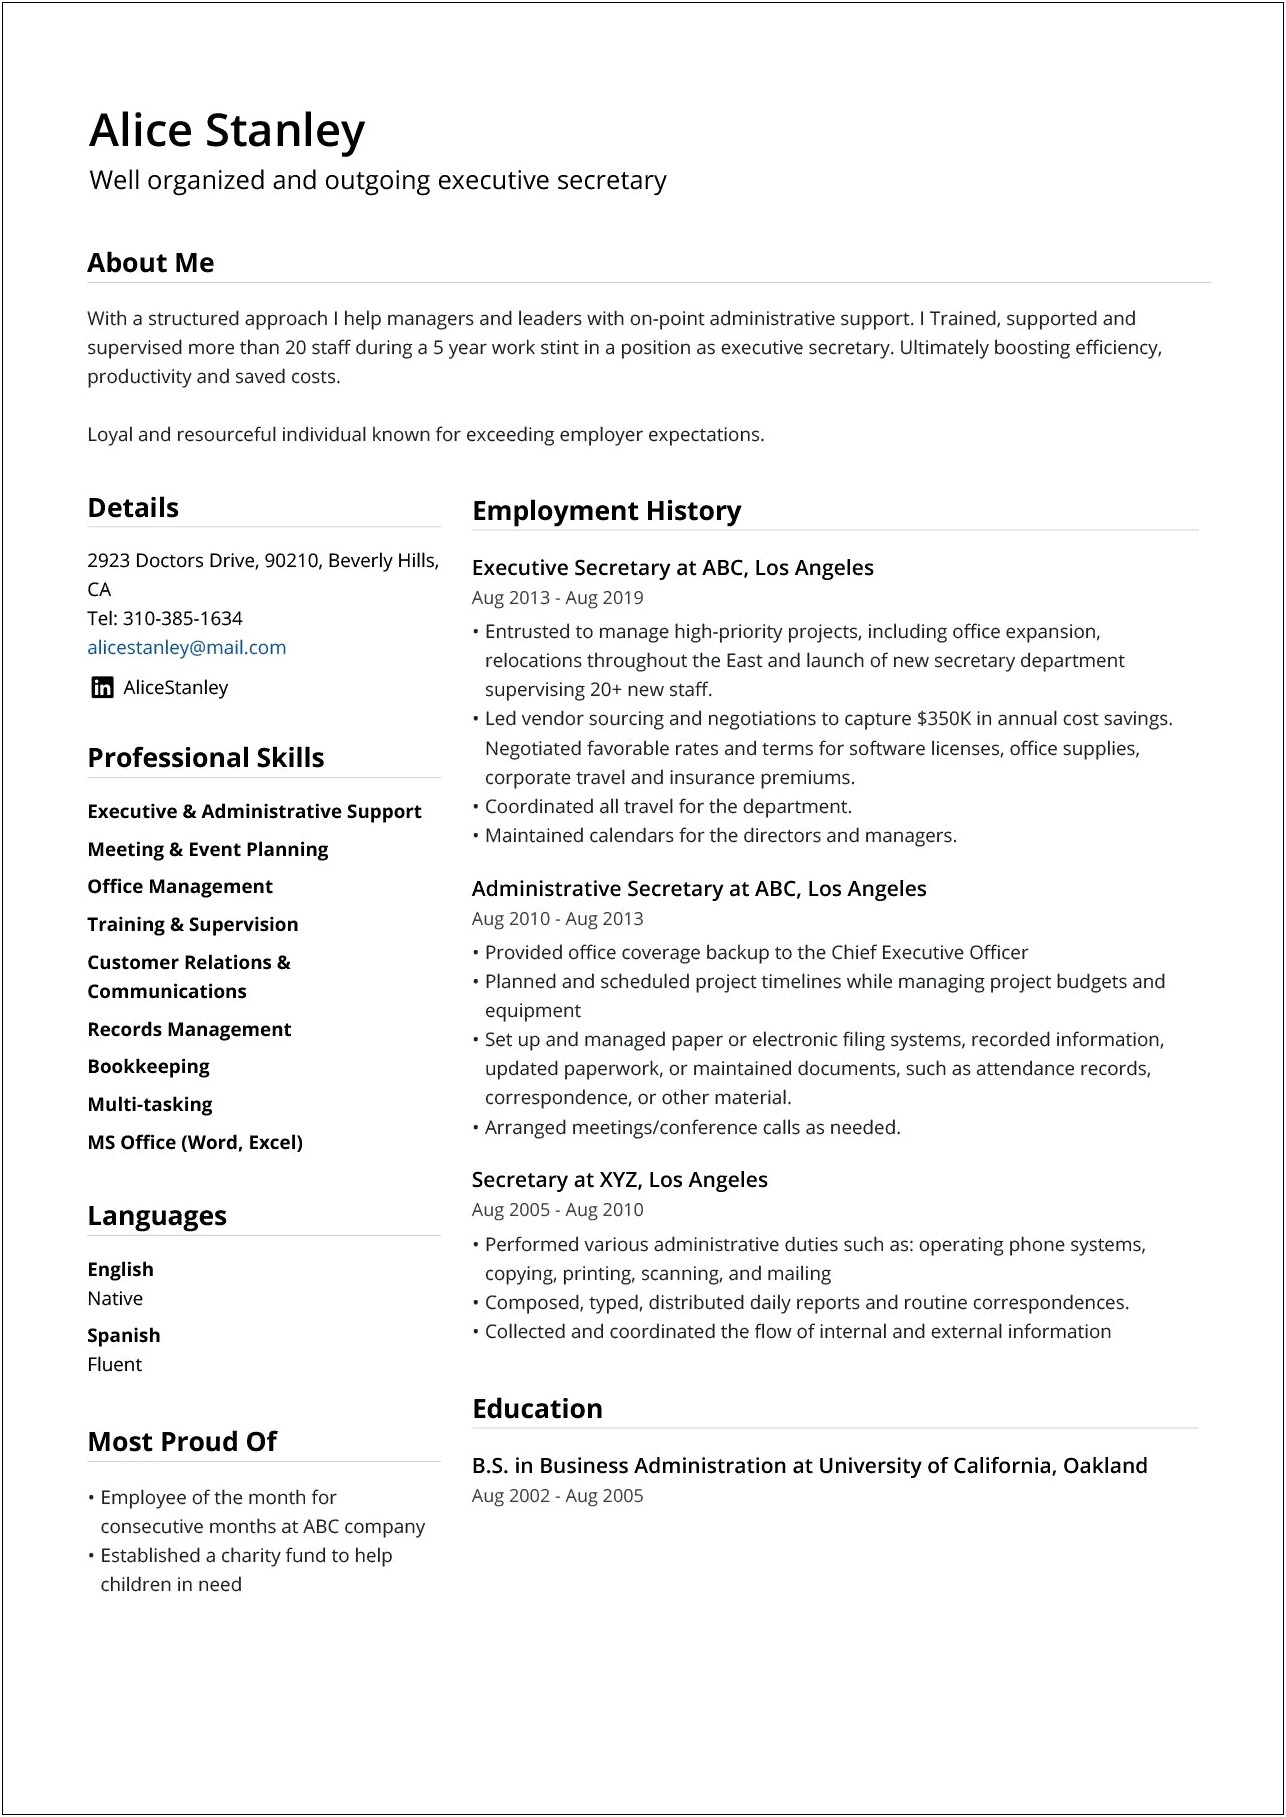 Example Of A Professional Profile On A Resume